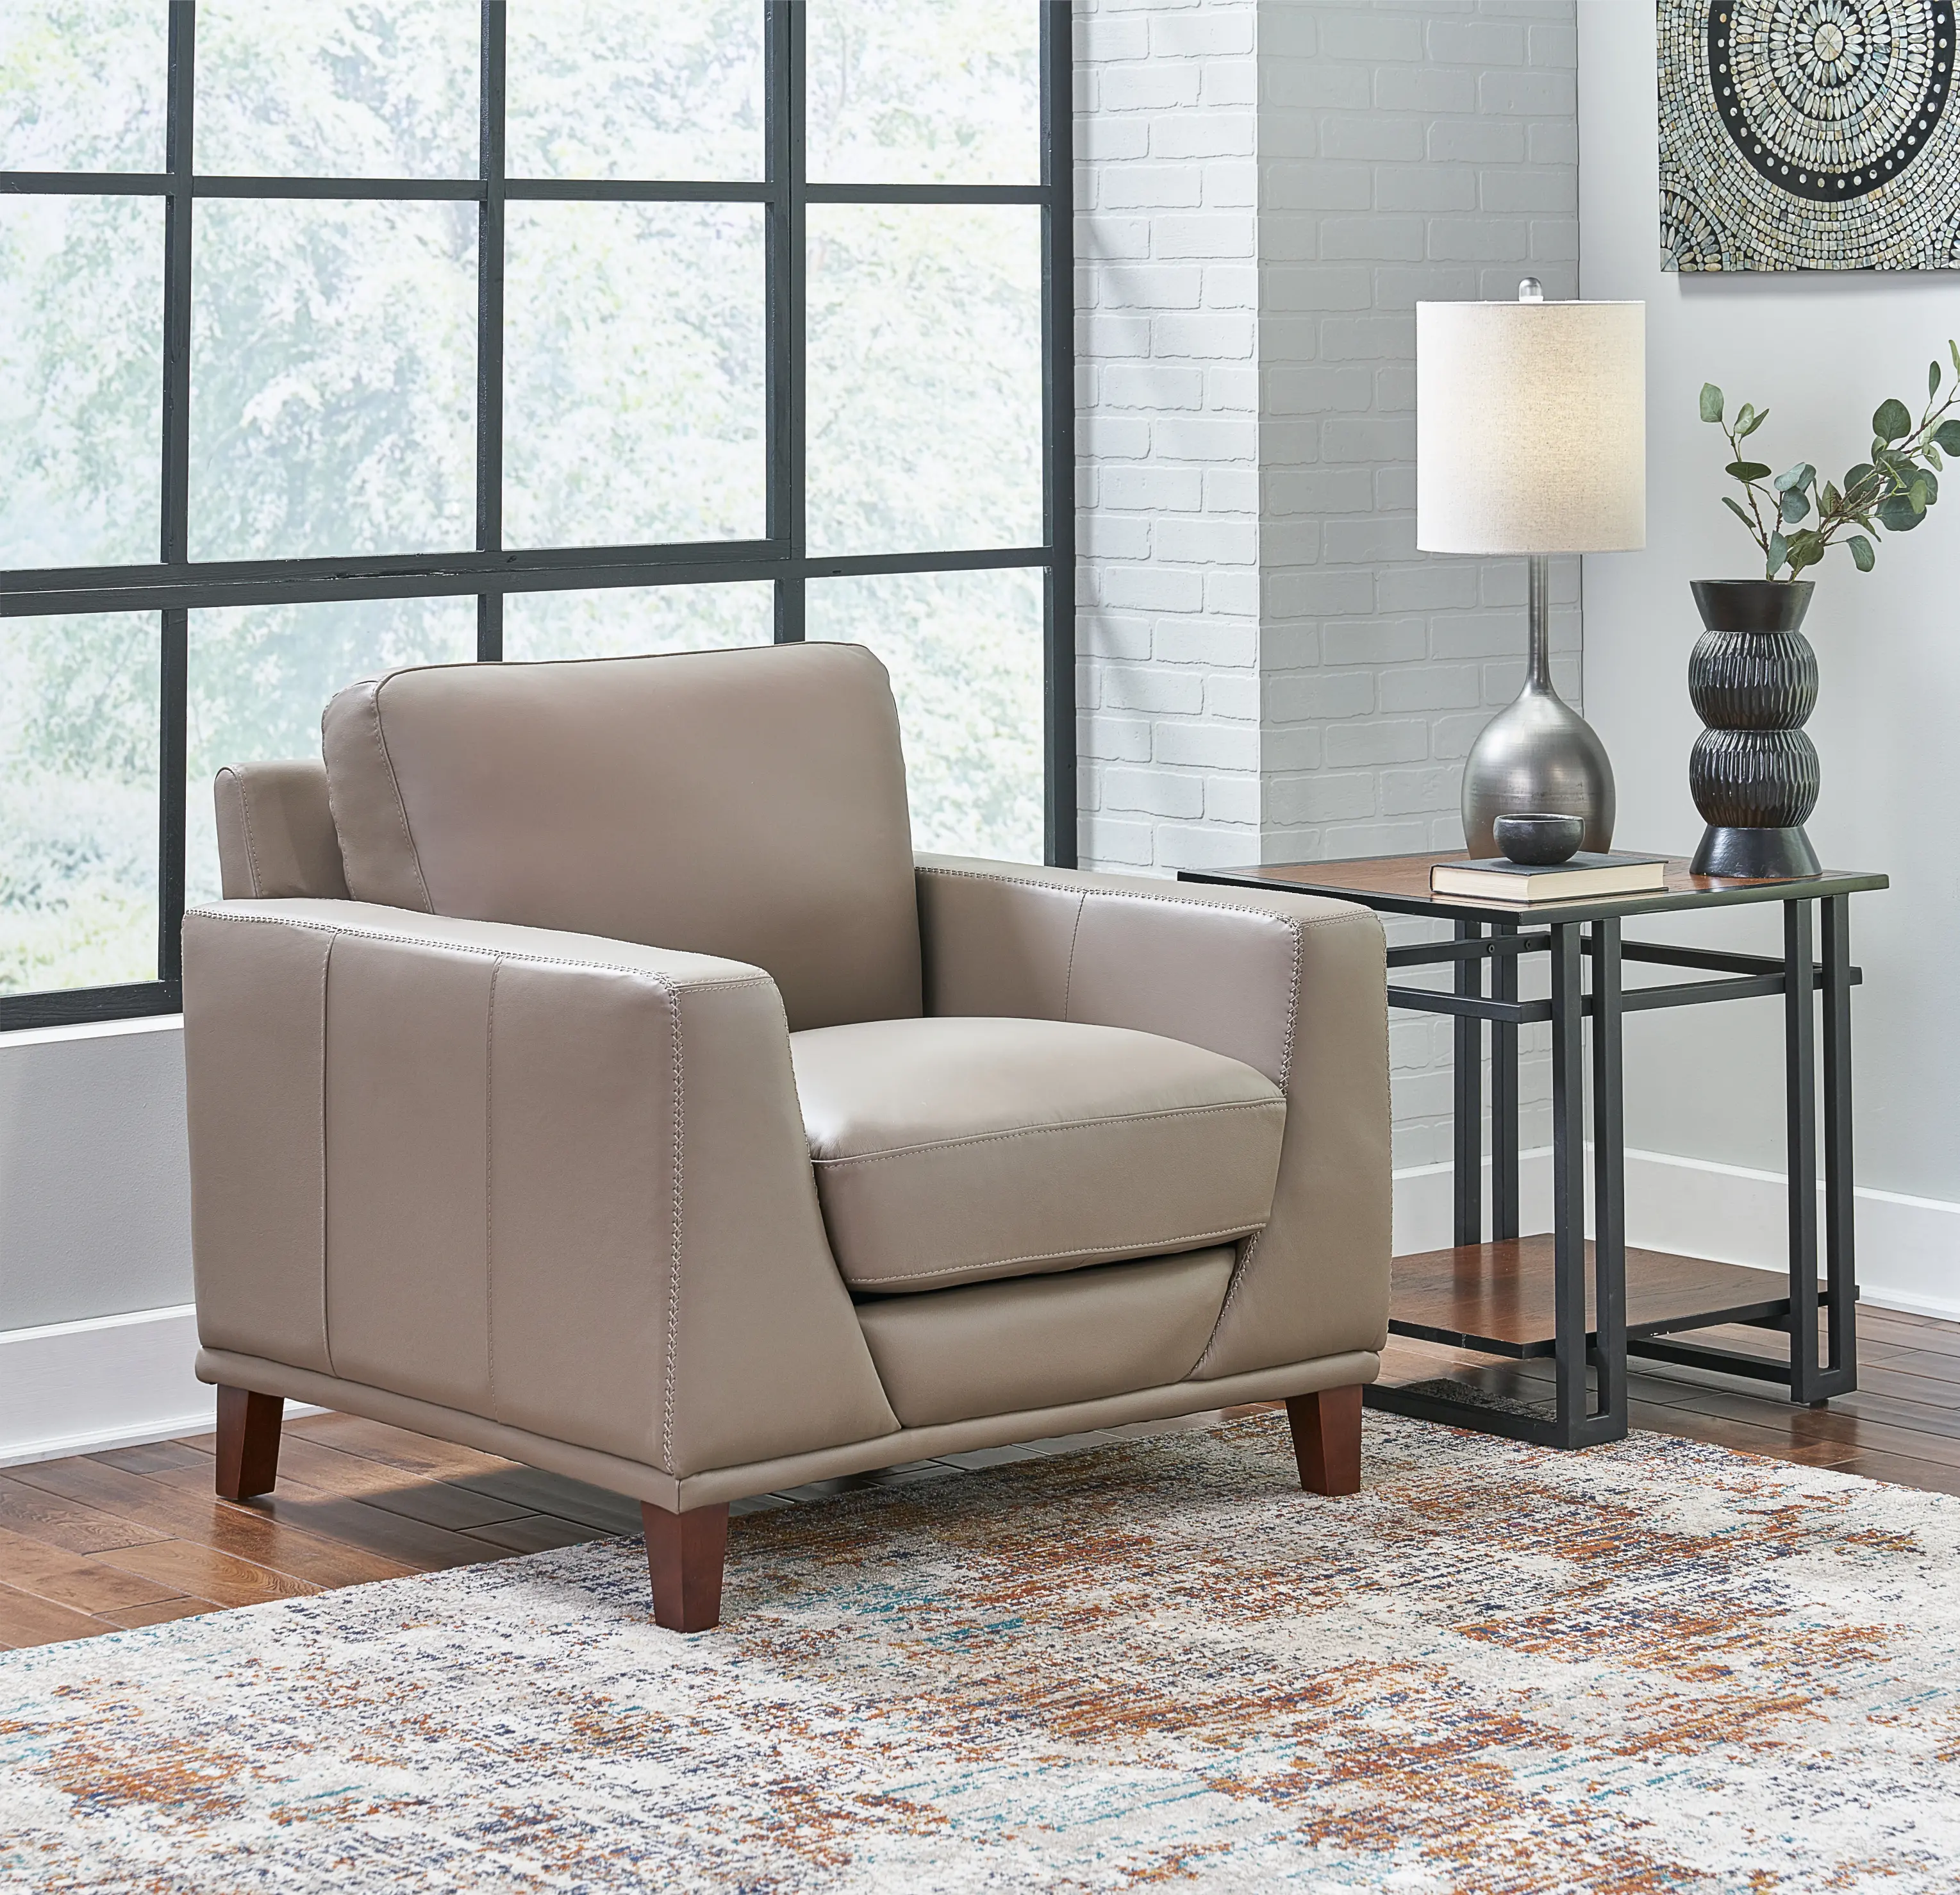 Sonoma Taupe Leather Chair - Amax Leather